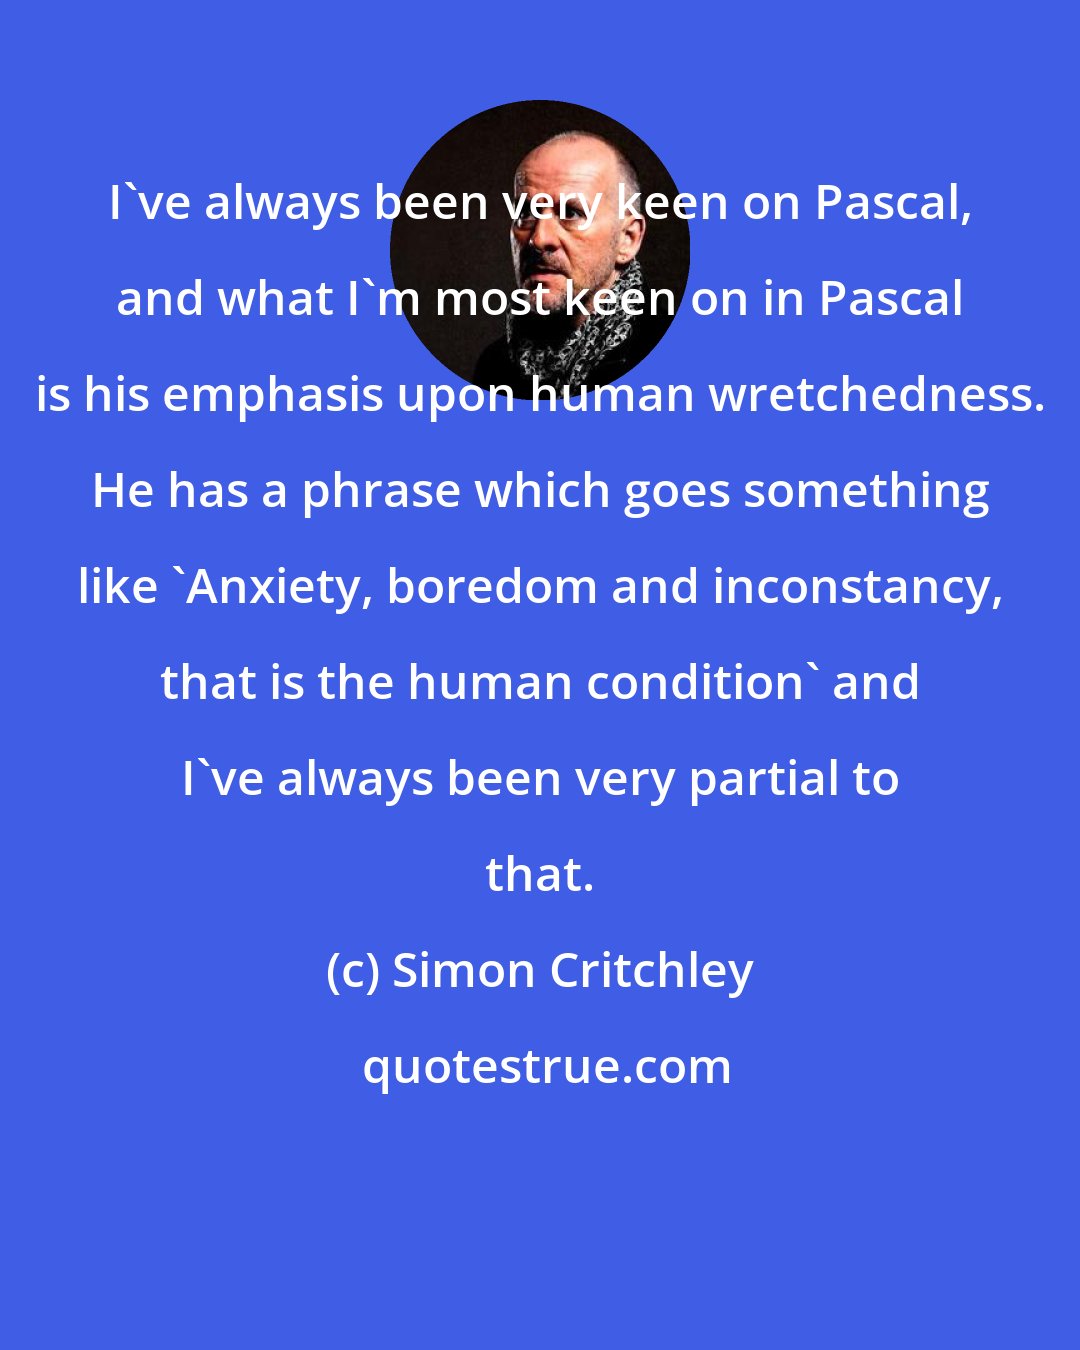 Simon Critchley: I've always been very keen on Pascal, and what I'm most keen on in Pascal is his emphasis upon human wretchedness. He has a phrase which goes something like 'Anxiety, boredom and inconstancy, that is the human condition' and I've always been very partial to that.